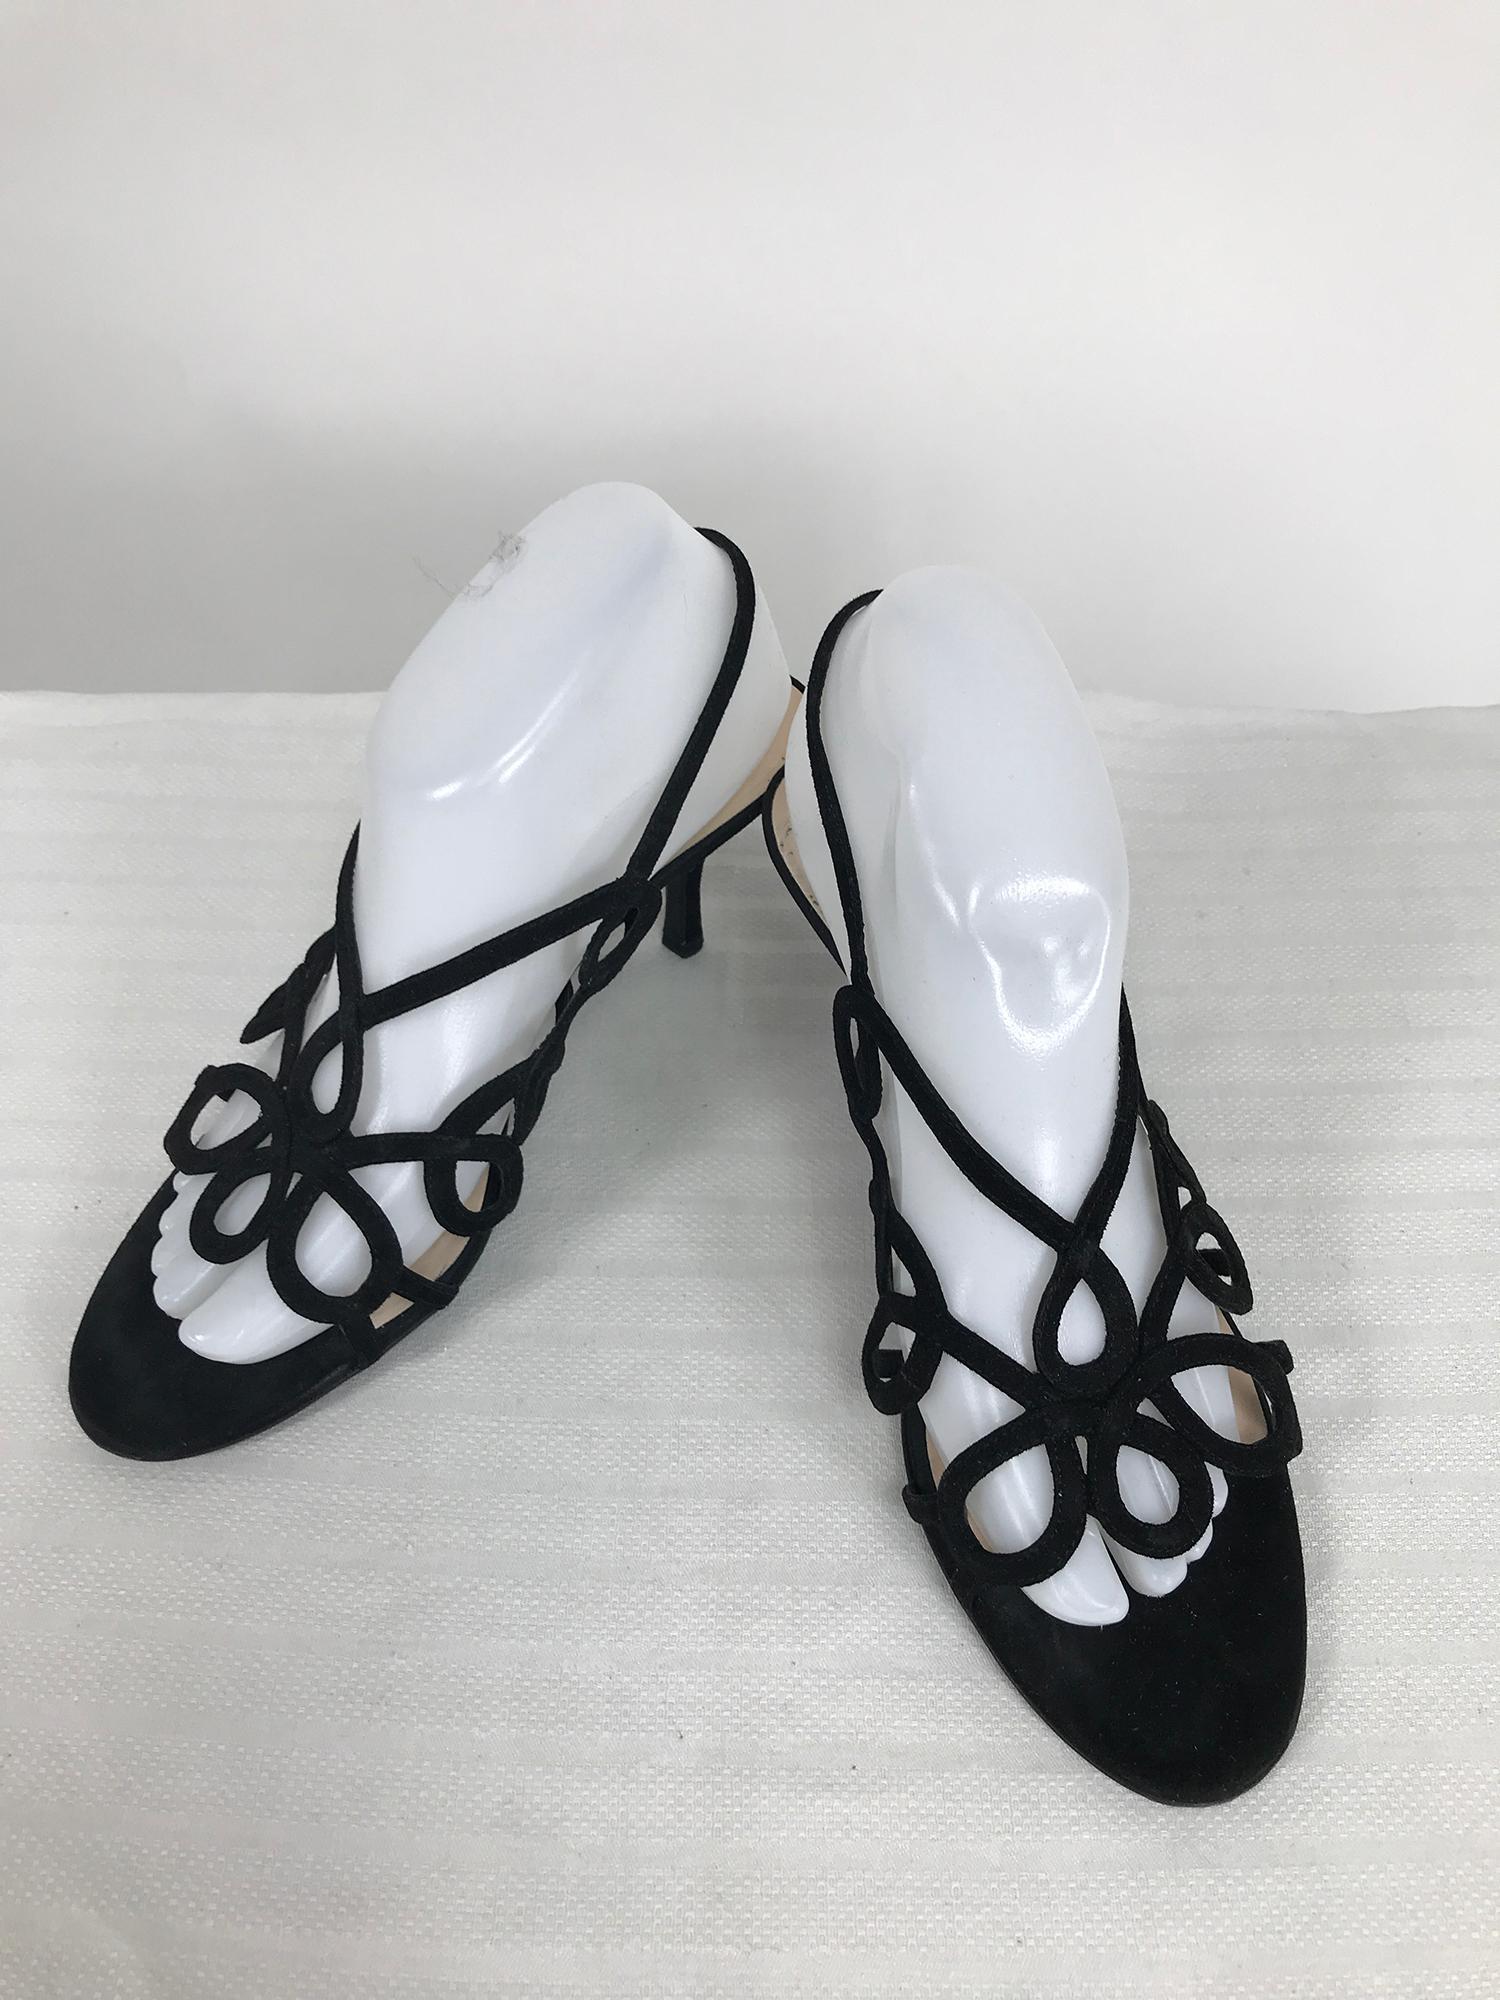 Prada black suede loop high heel sandals, close at the side back with gold buckles marked size 38 1/2. In good pre owned condition with wear to the soles, but still clean with lots of wear left.
